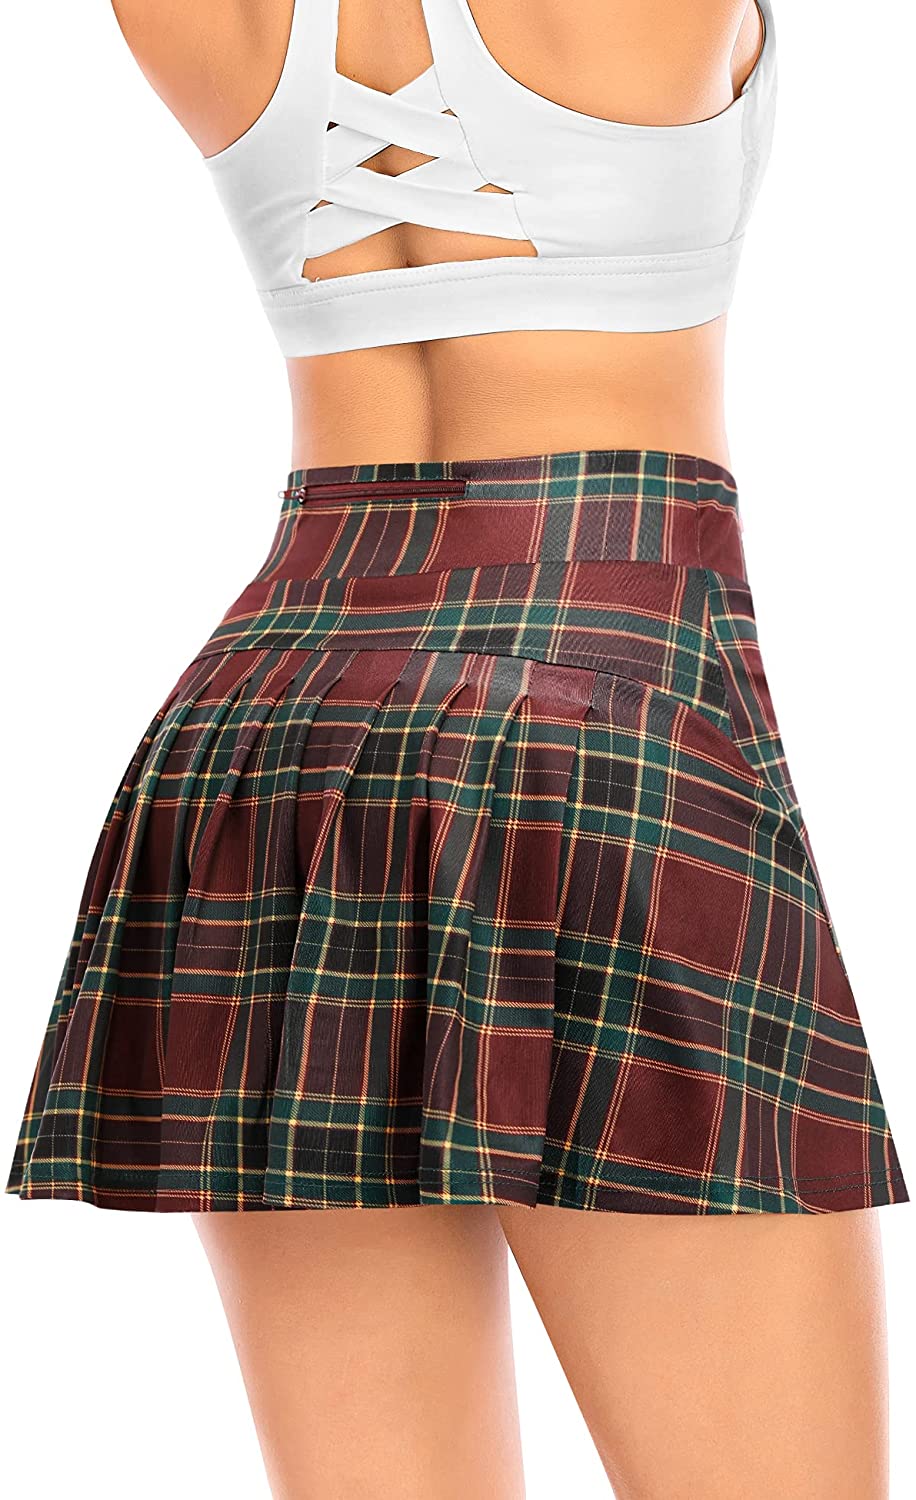 Women Pleated Tennis Skirt With Pockets Shorts Athletic Skirts